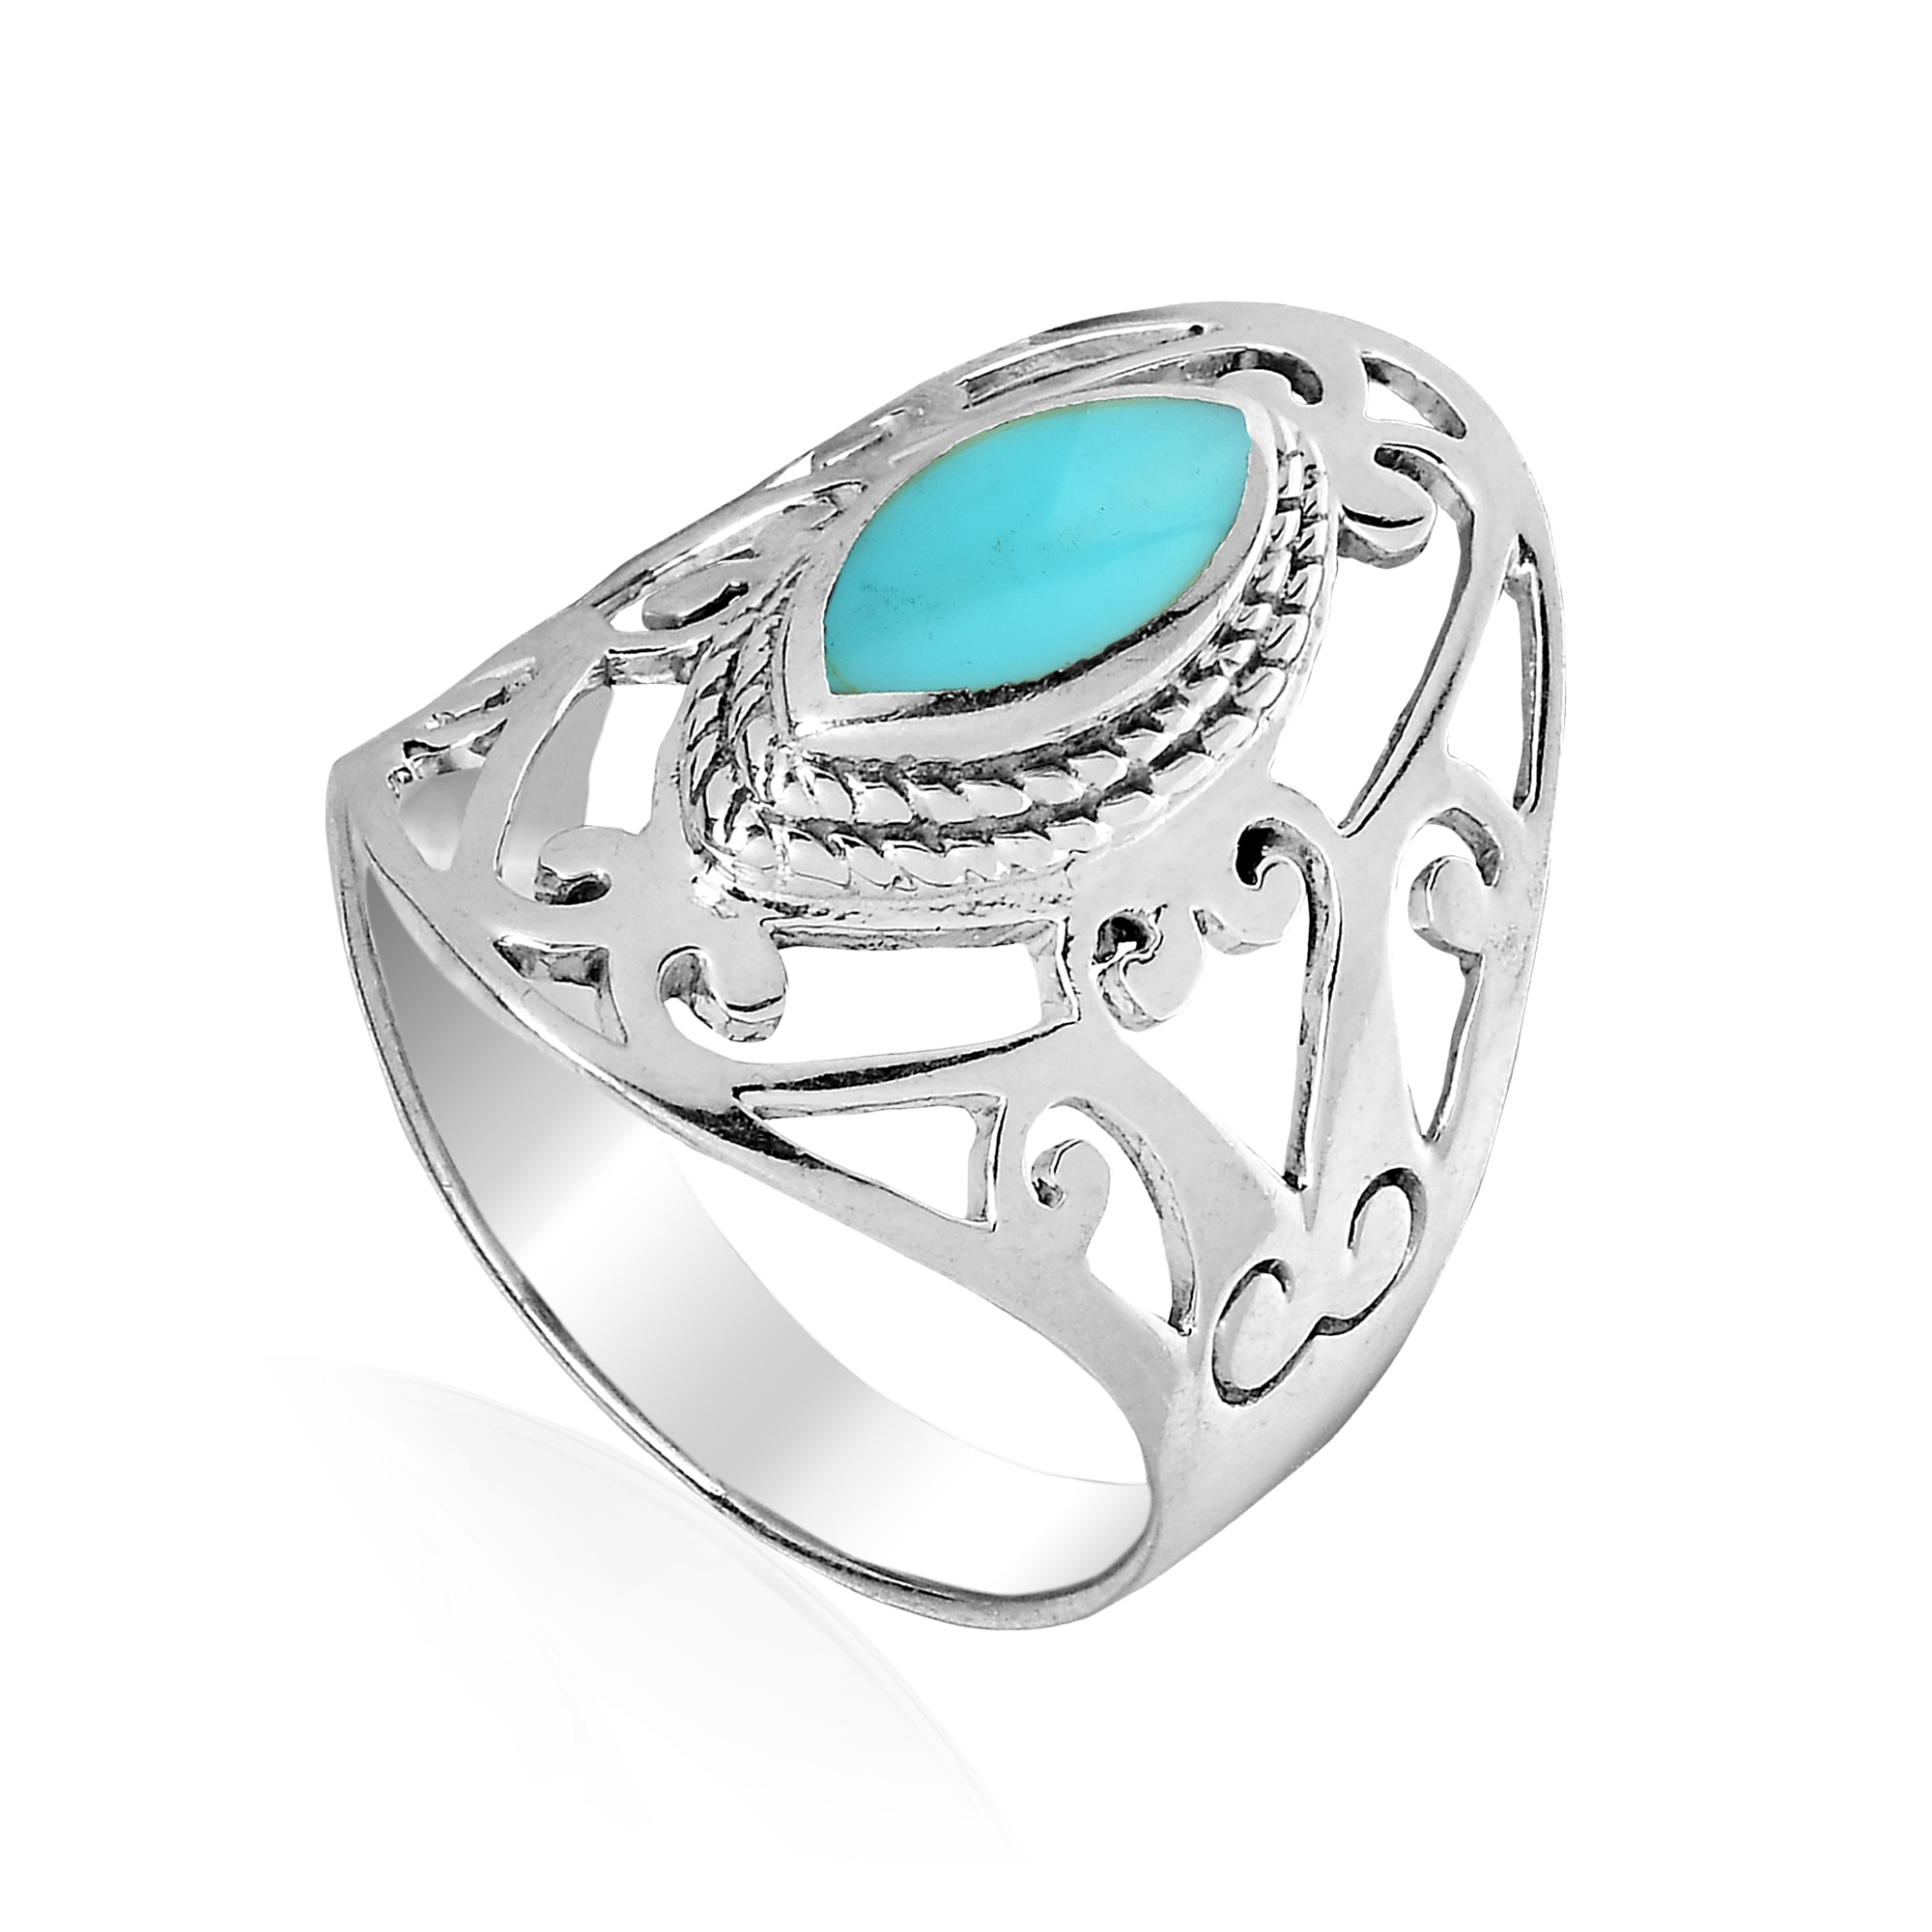 Unique Marquise Cut Stone Inlay w/ Filigree Sterling Silver Ring